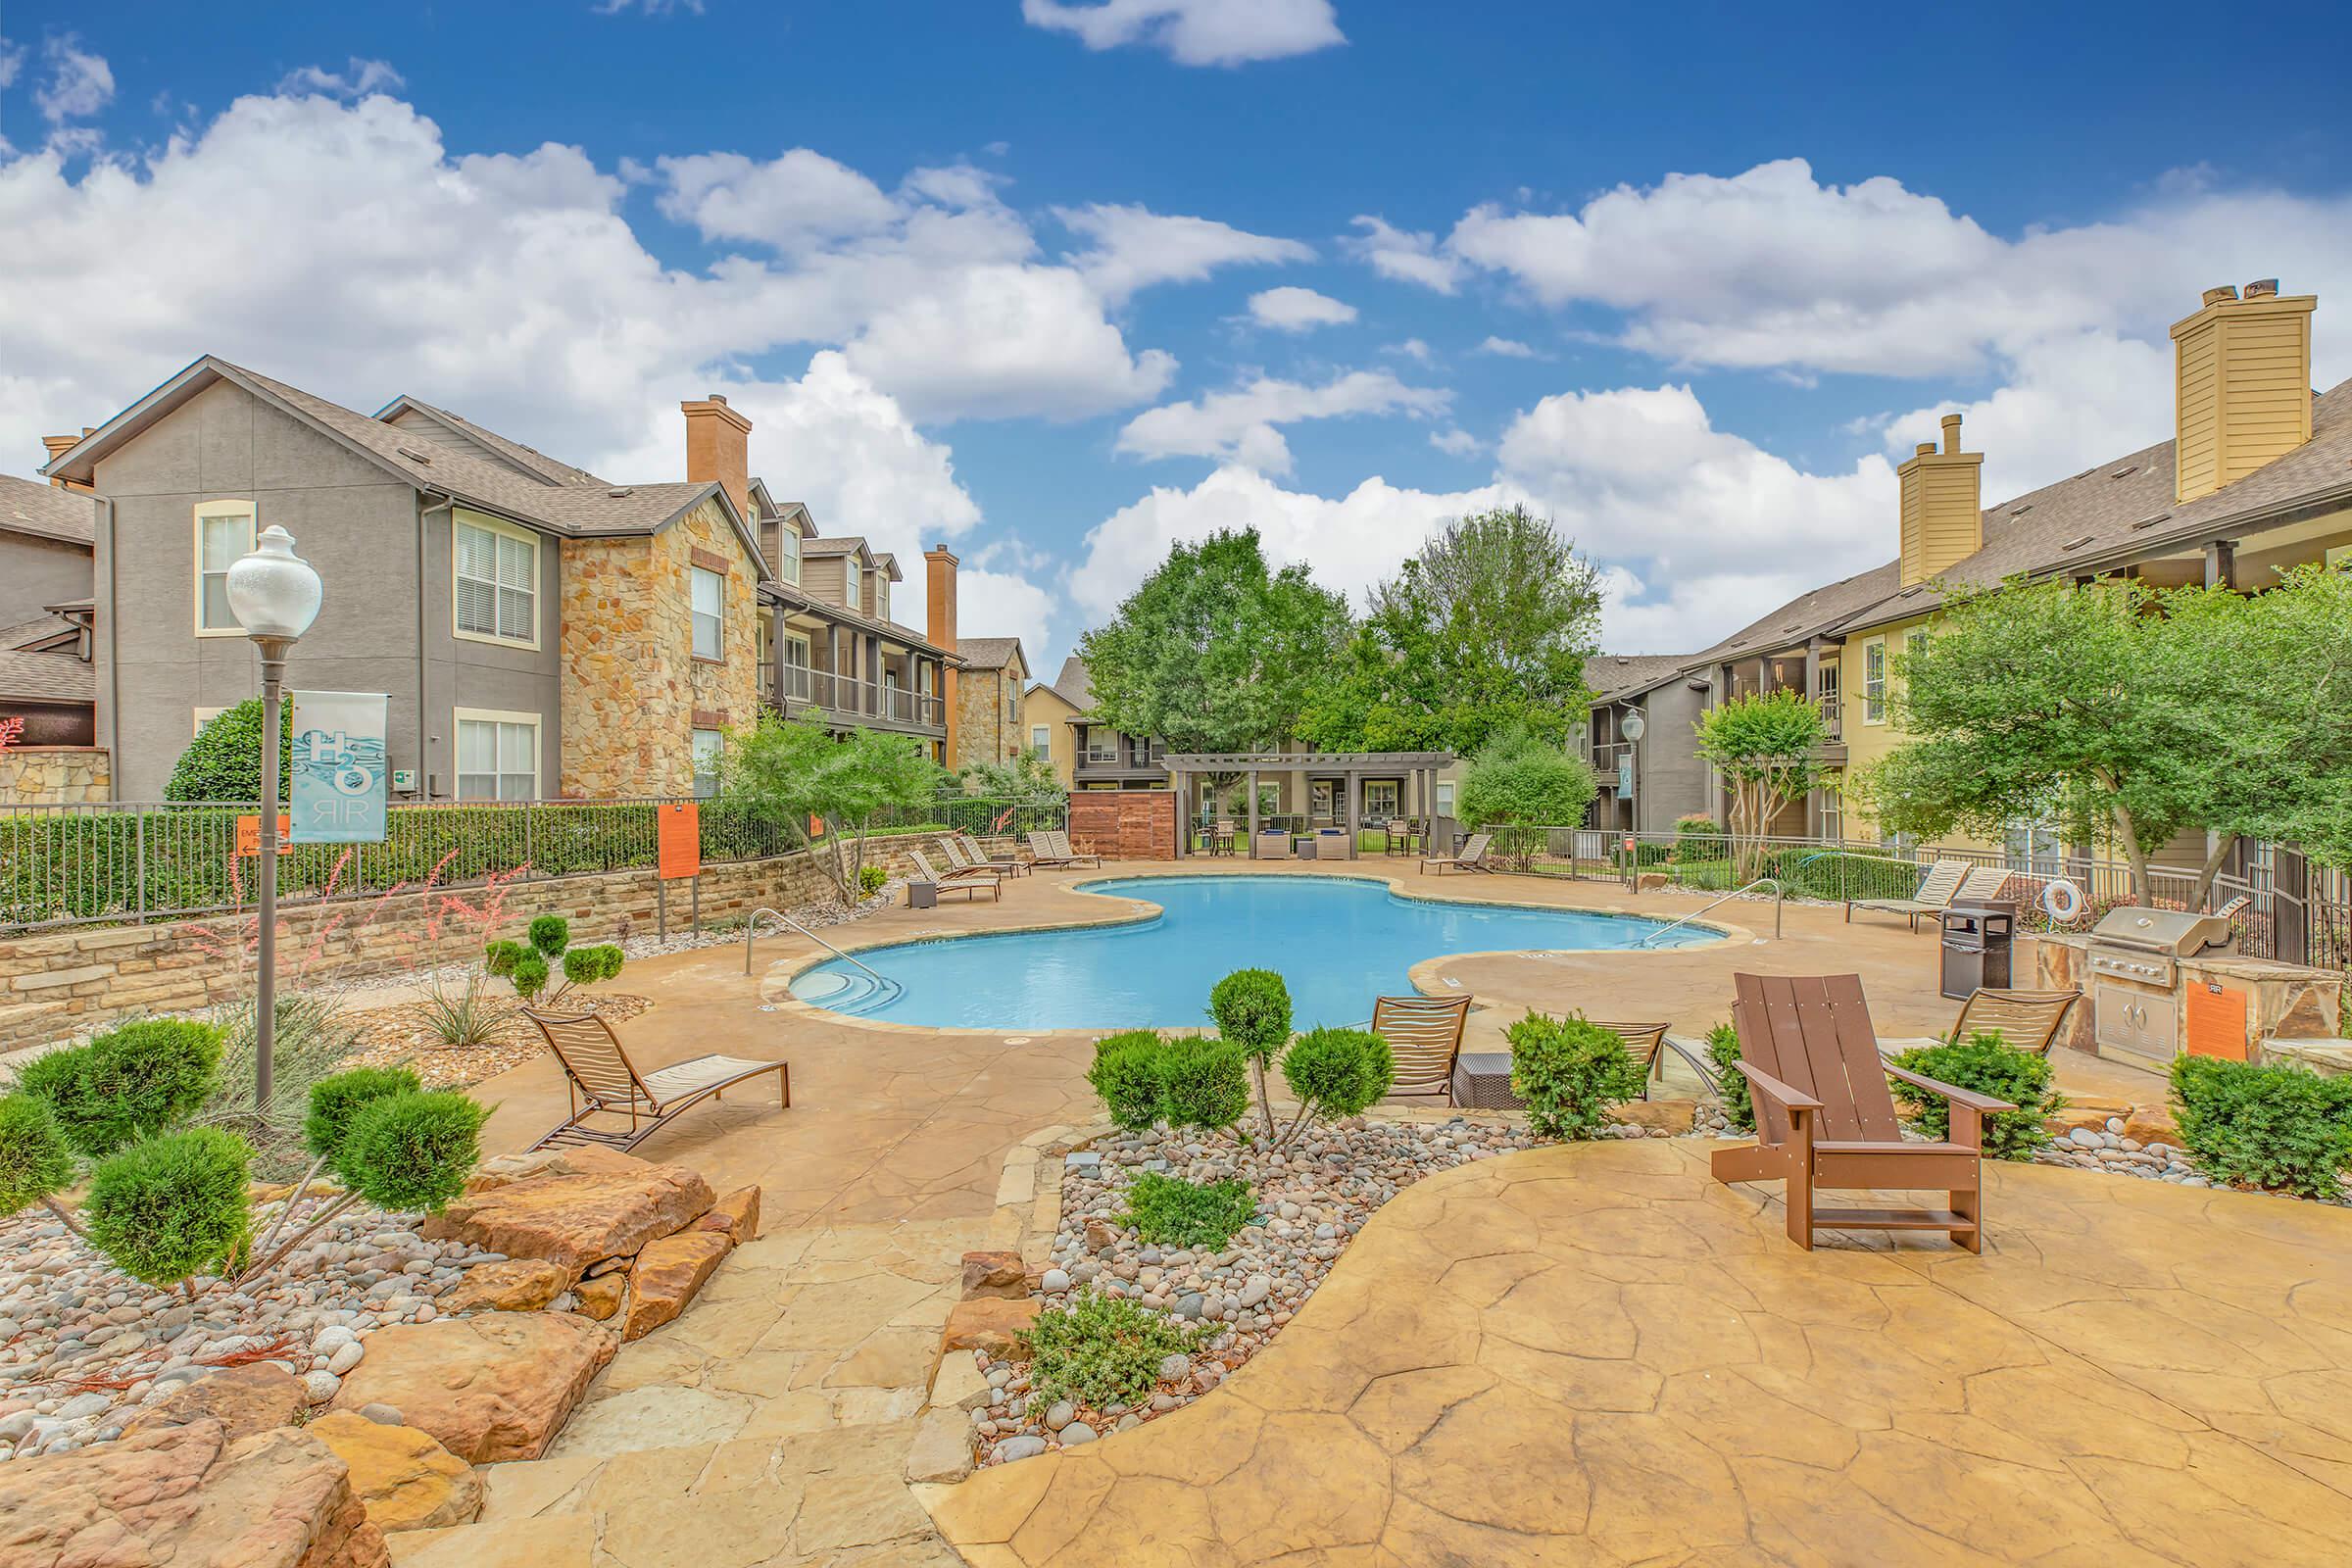 The Ranch at Ridgeview Apartments community pool